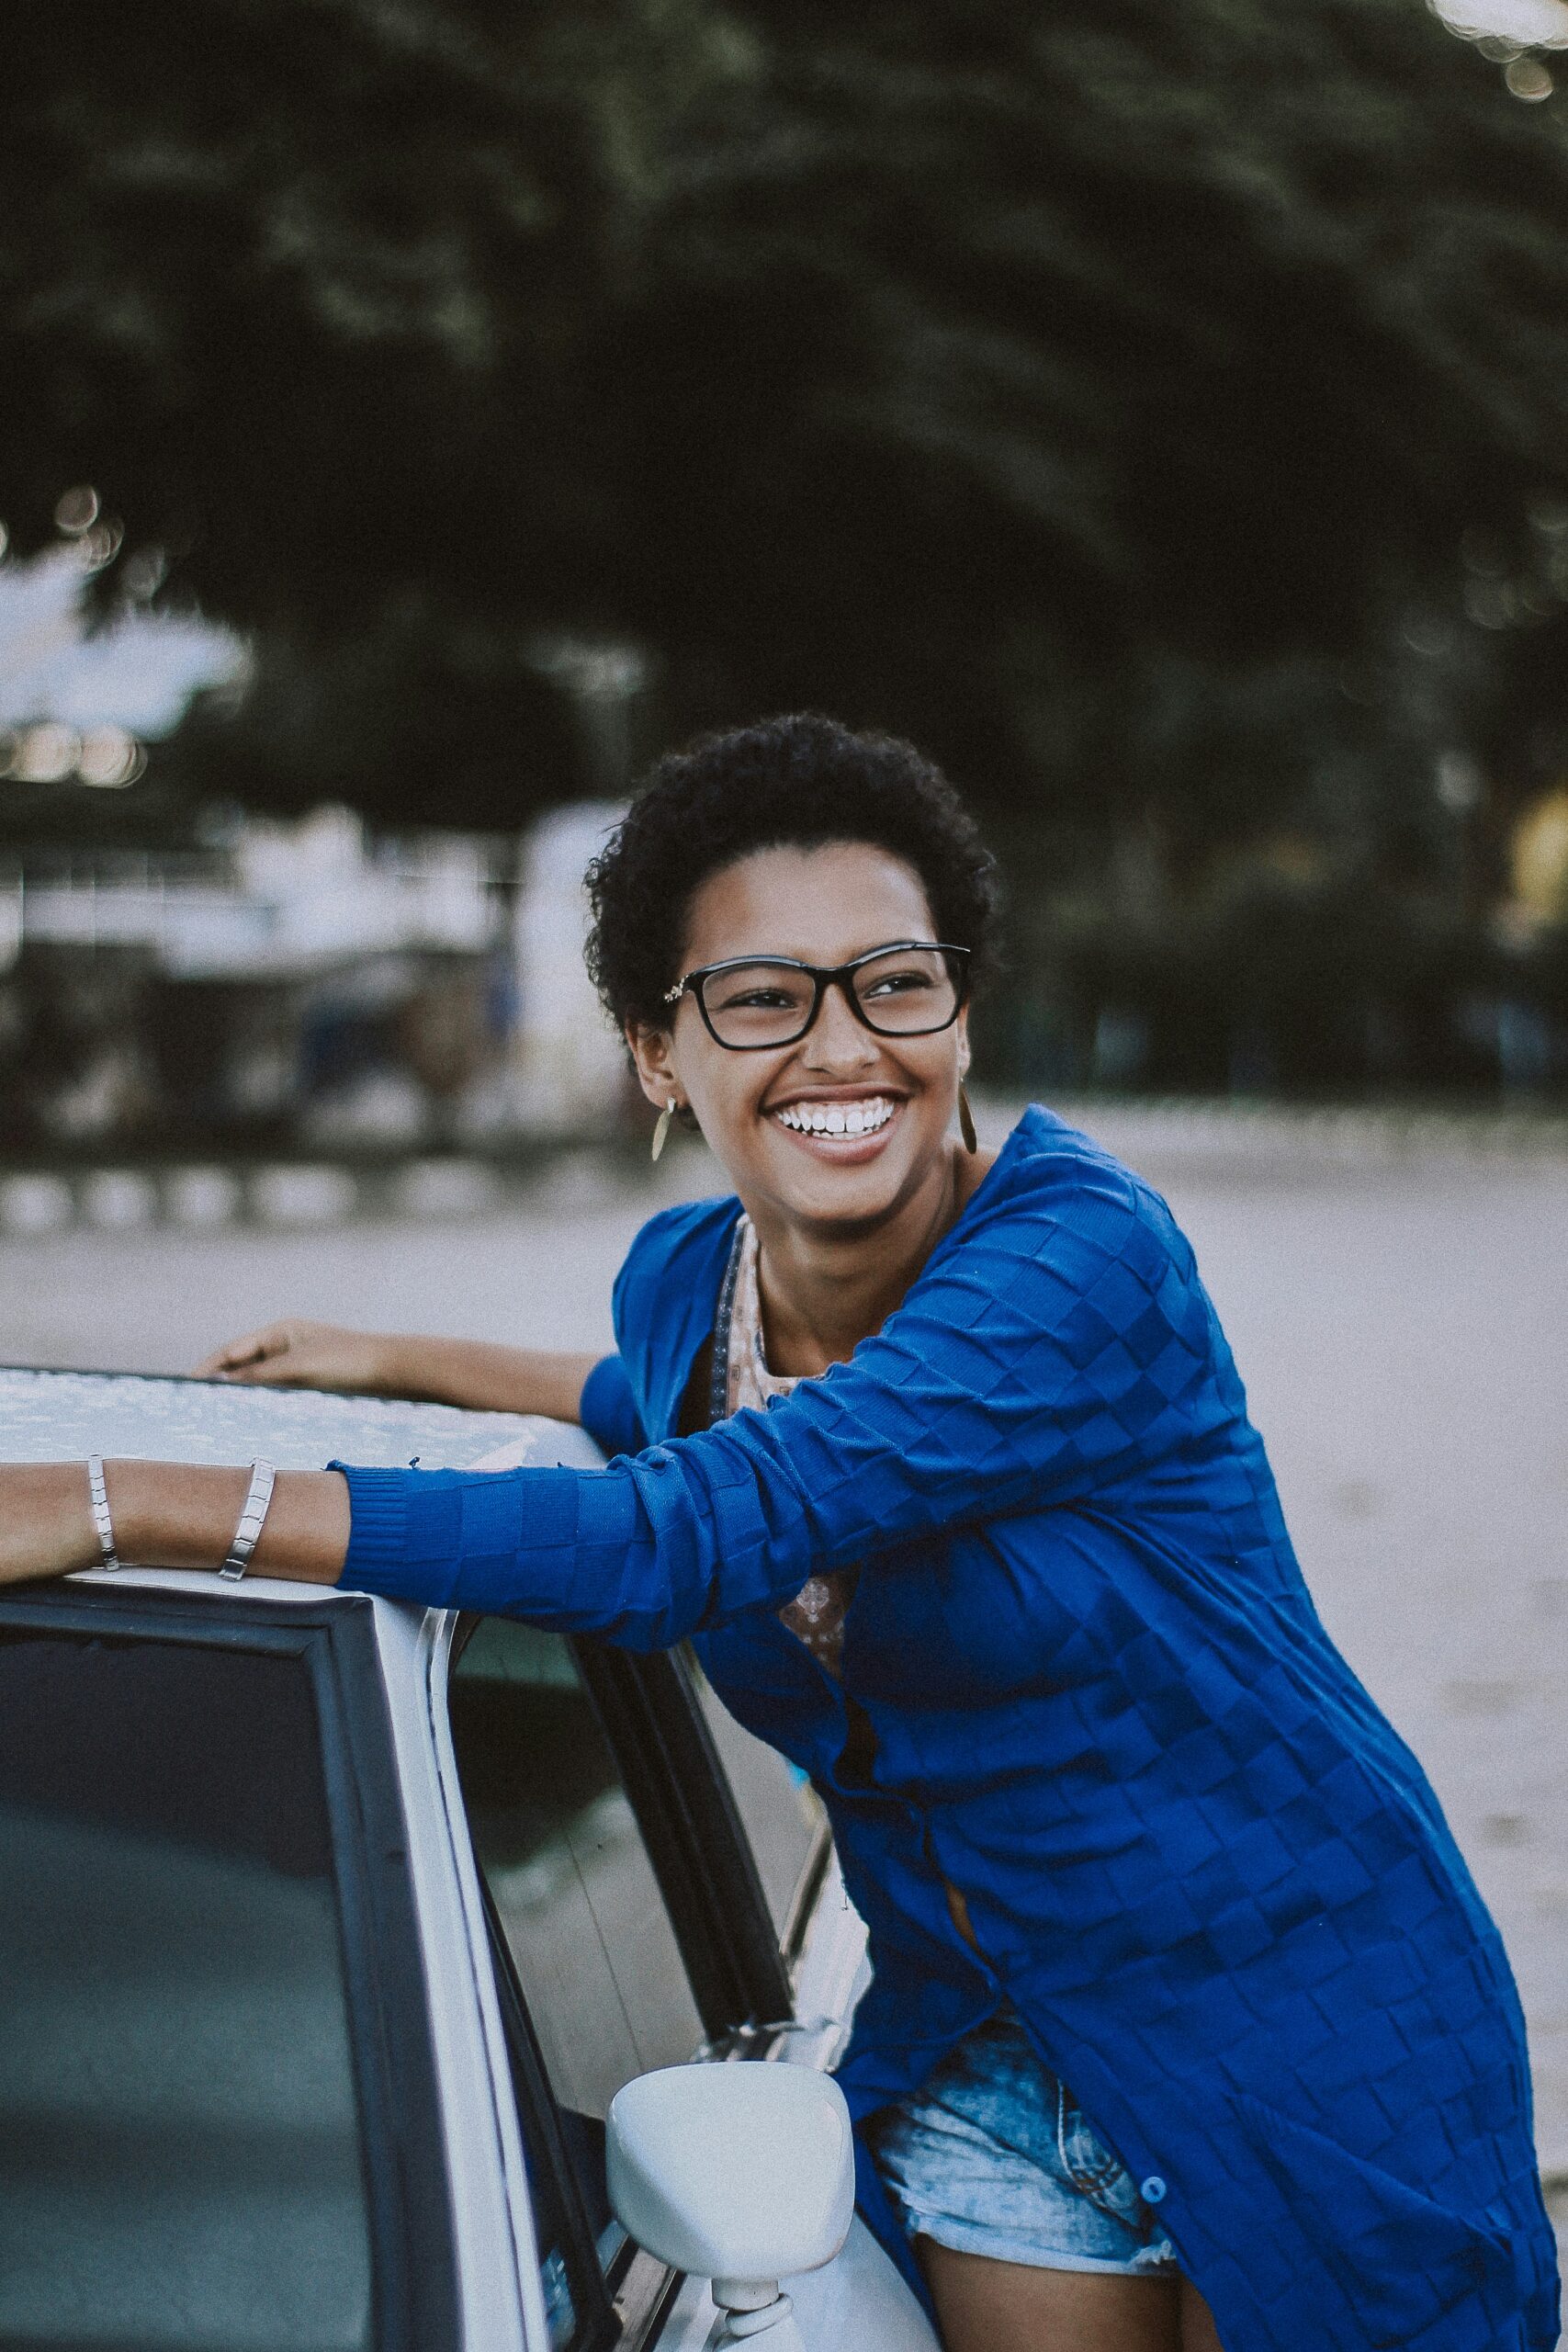 Black woman in a blue shirt, leaning over a car, being happy single. The relationships with yourself is important. There are many strategies to help you be happy when single in Manhattan.